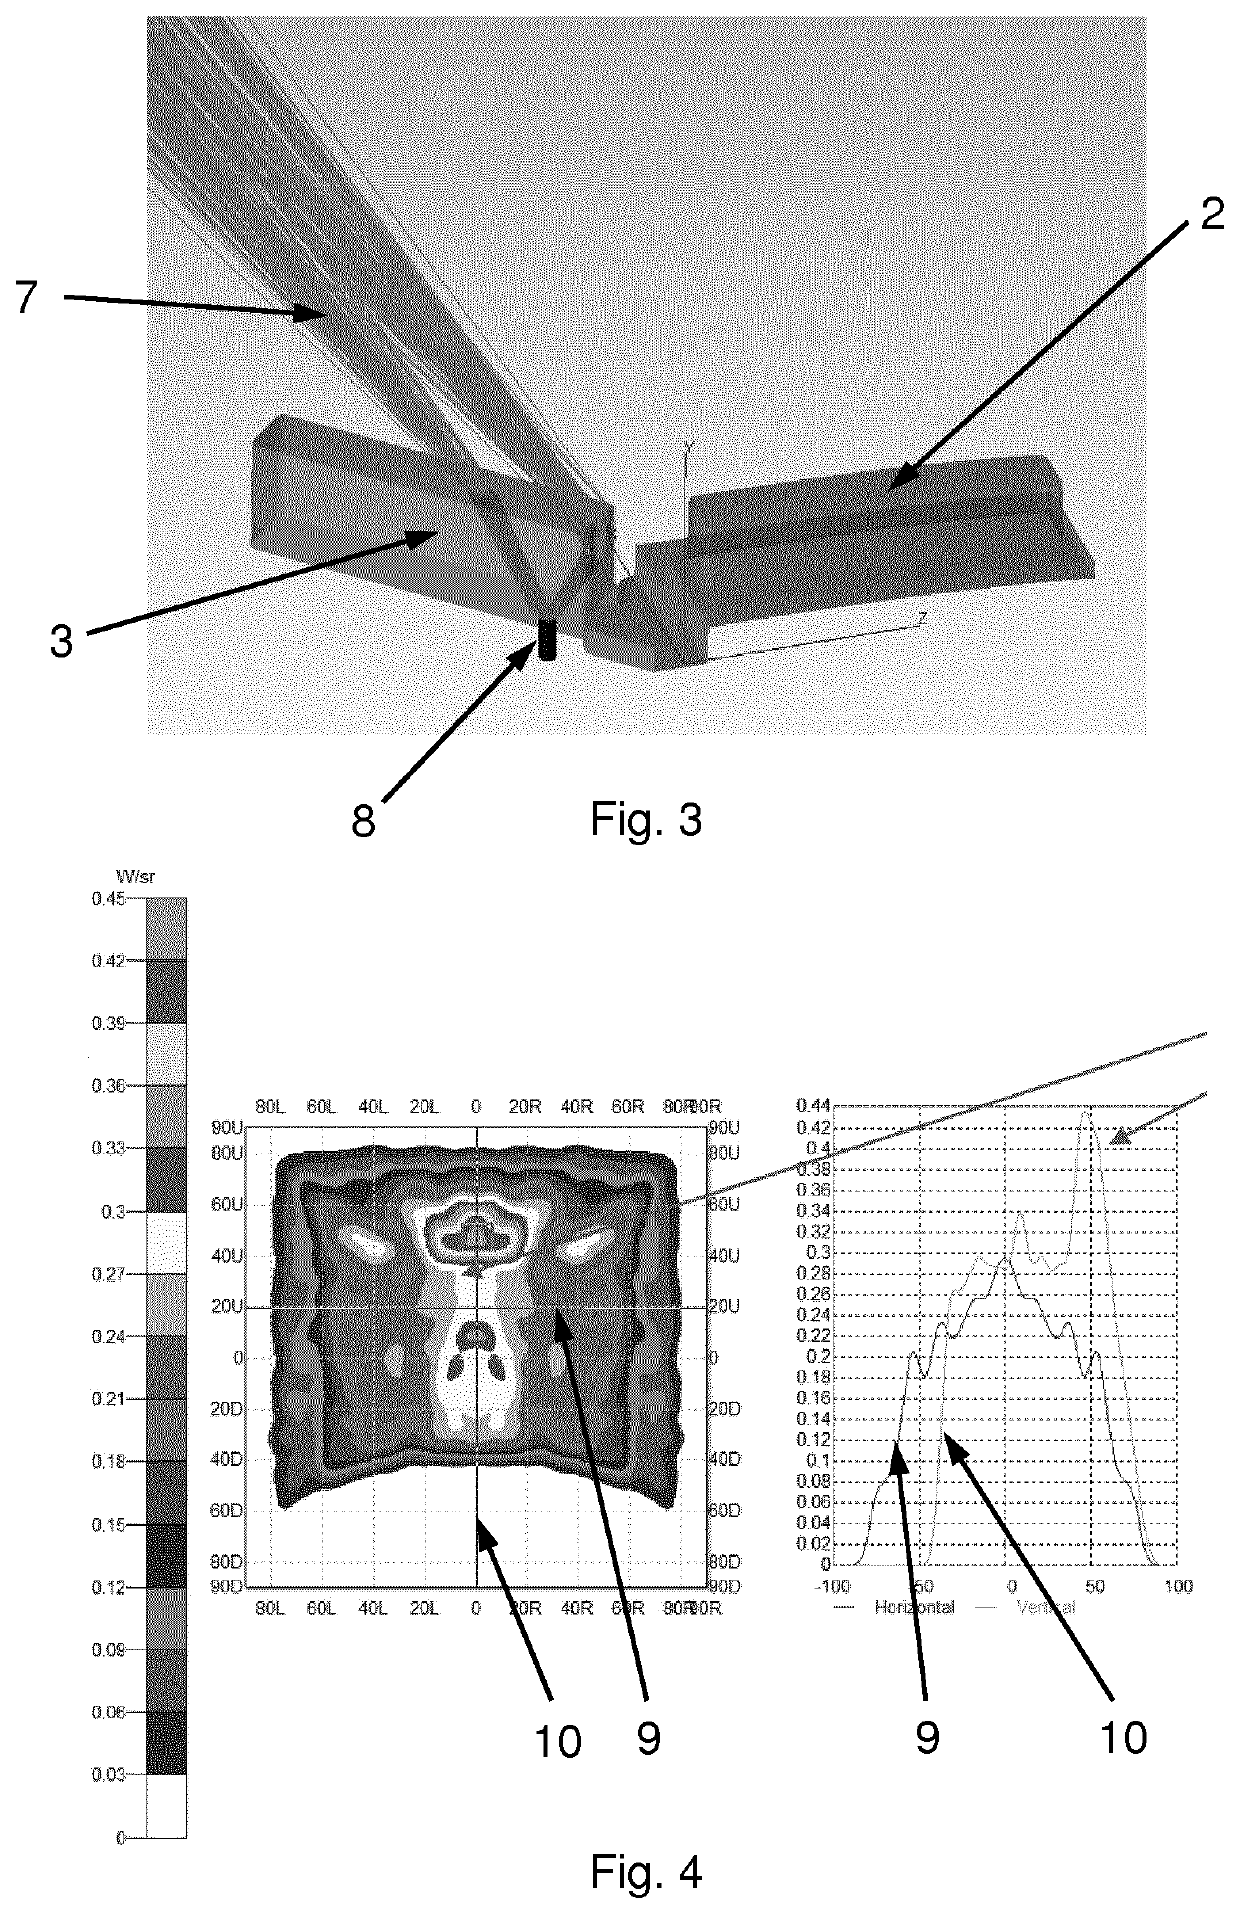 Device for measuring light exposure of a subject